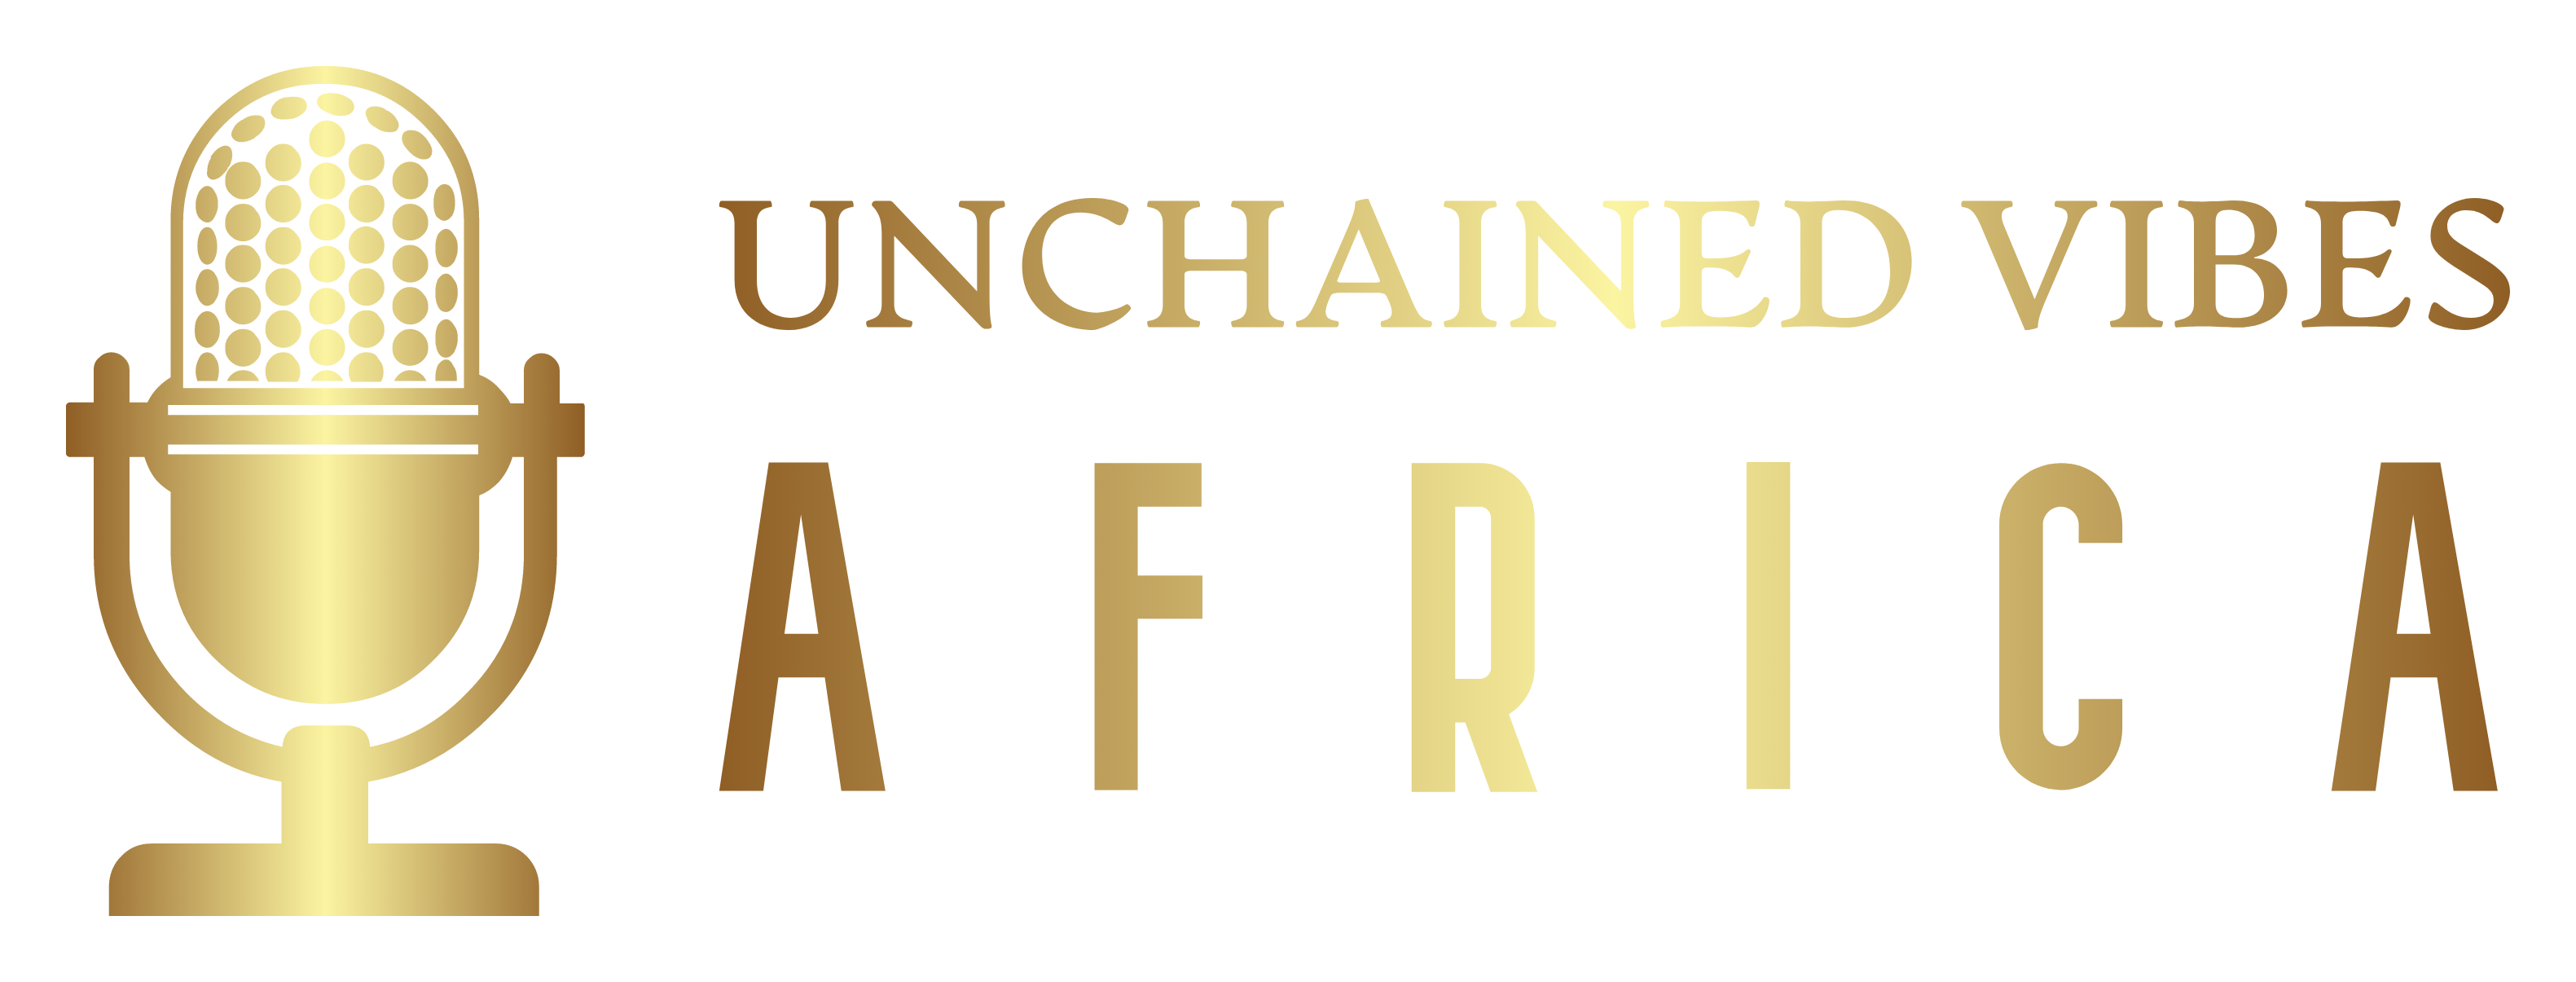 Unchained Vibes Africa